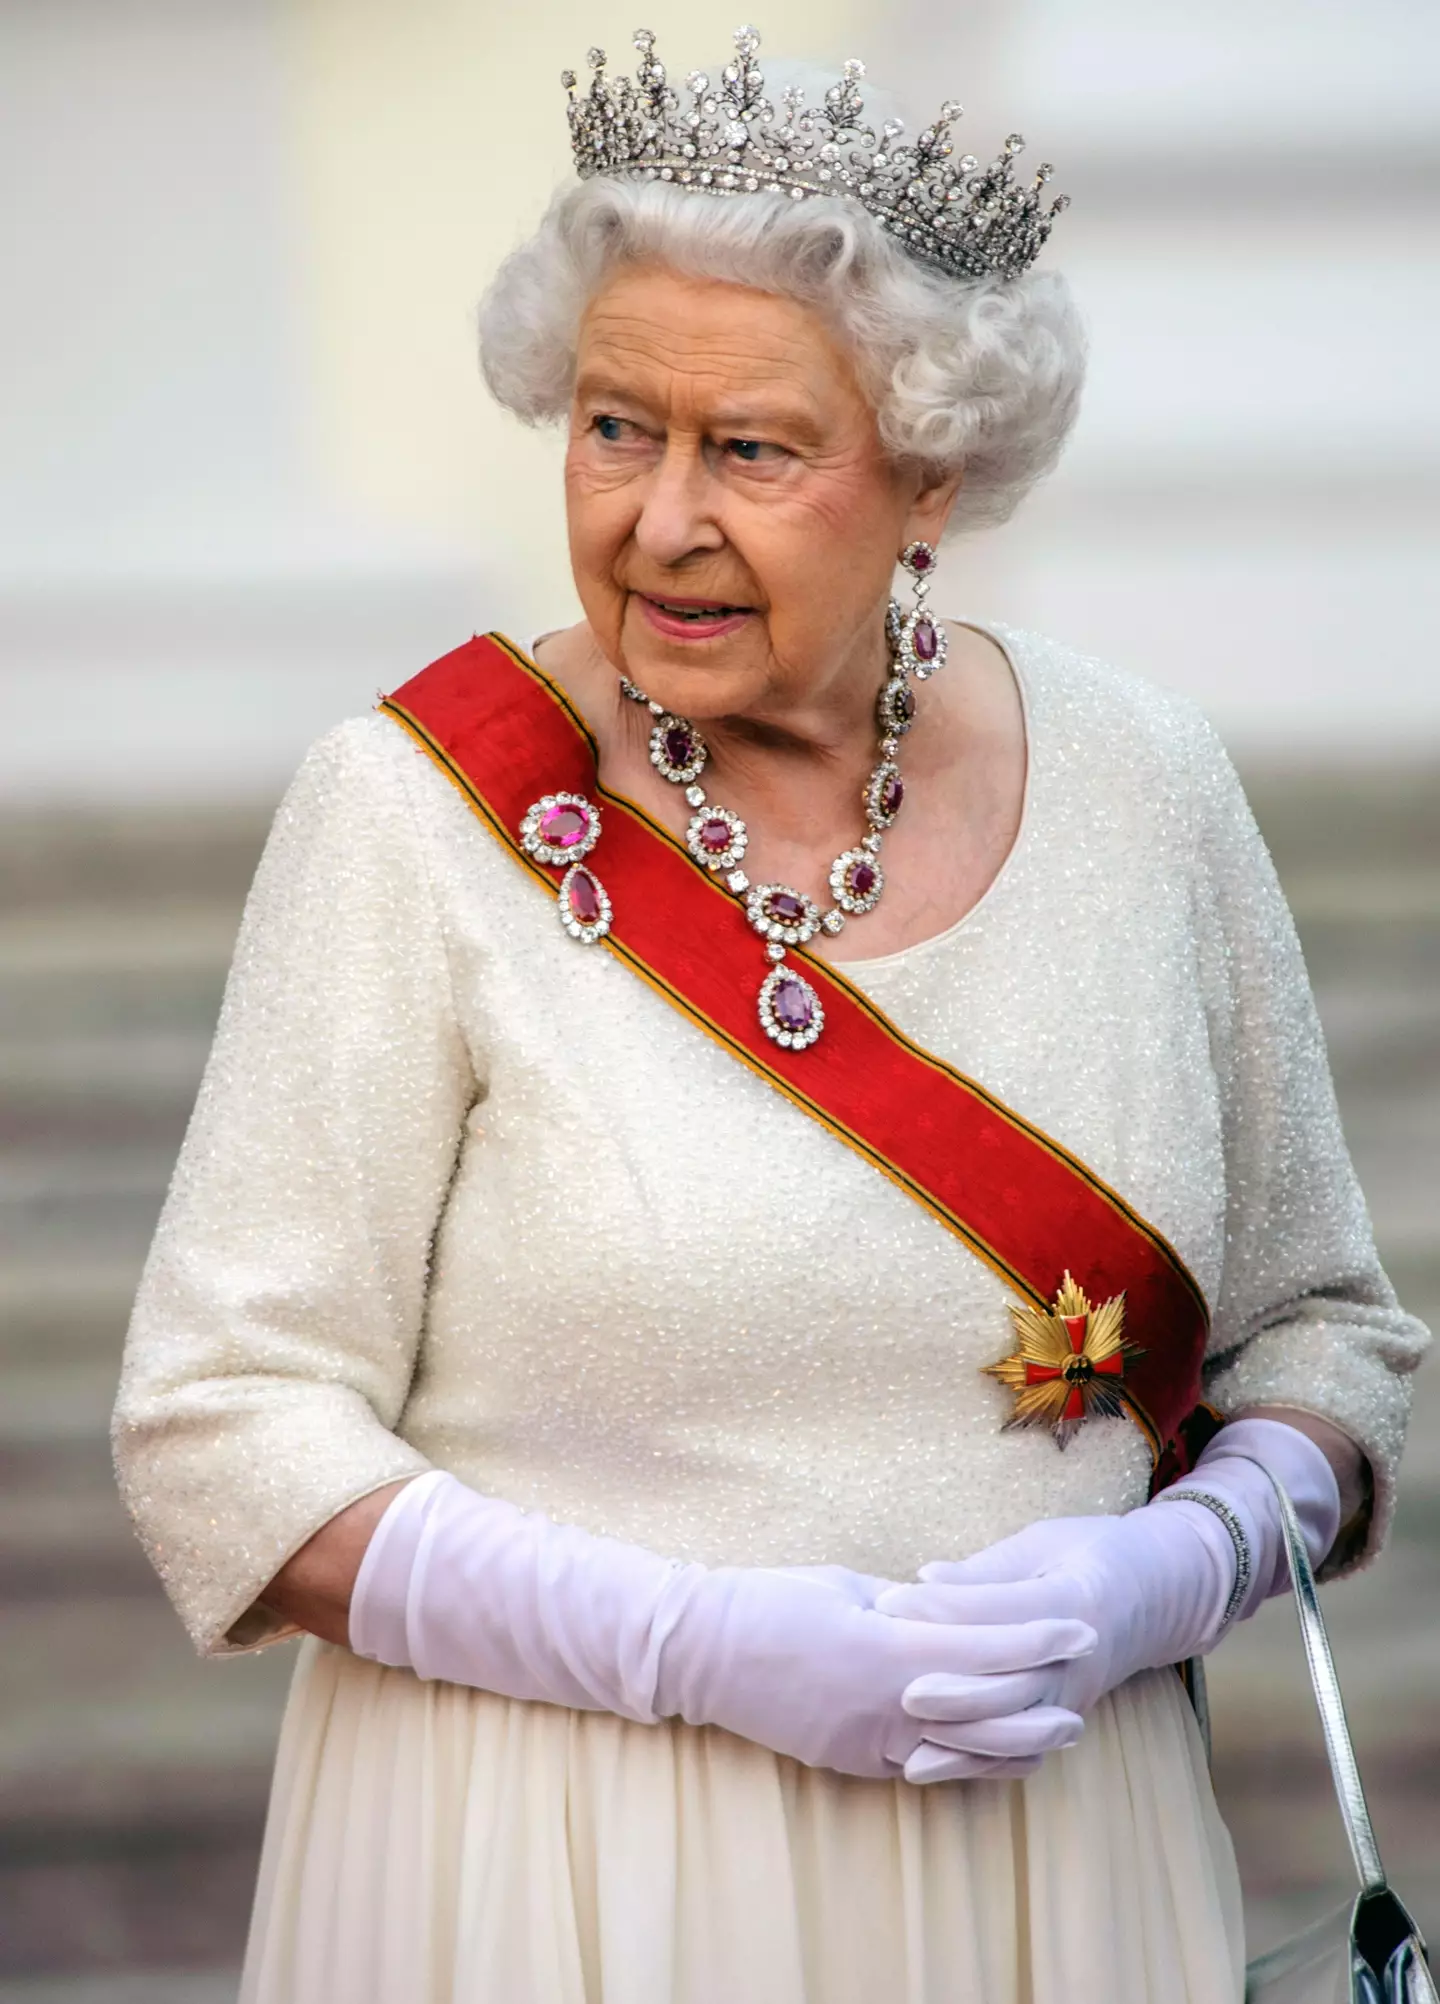 The Queen is set to be removed as the head of state in Jamaica.